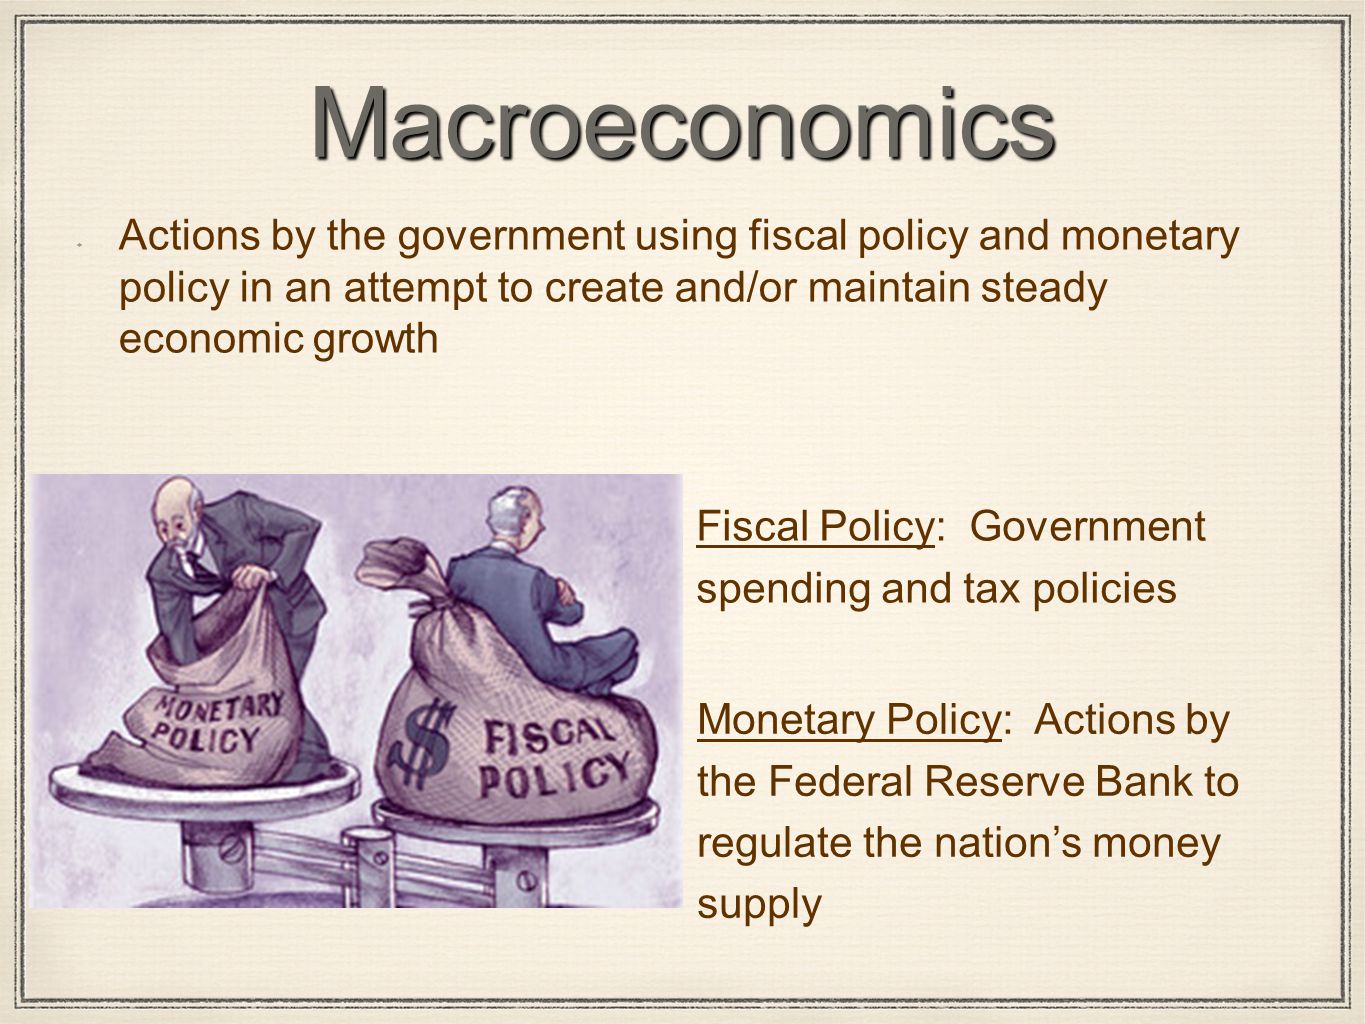 Macroeconomics Actions by the government using fiscal policy and monetary policy in an attempt to create and/or maintain steady economic growth Fiscal Policy: Government spending and tax policies Monetary Policy: Actions by the Federal Reserve Bank to regulate the nation’s money supply